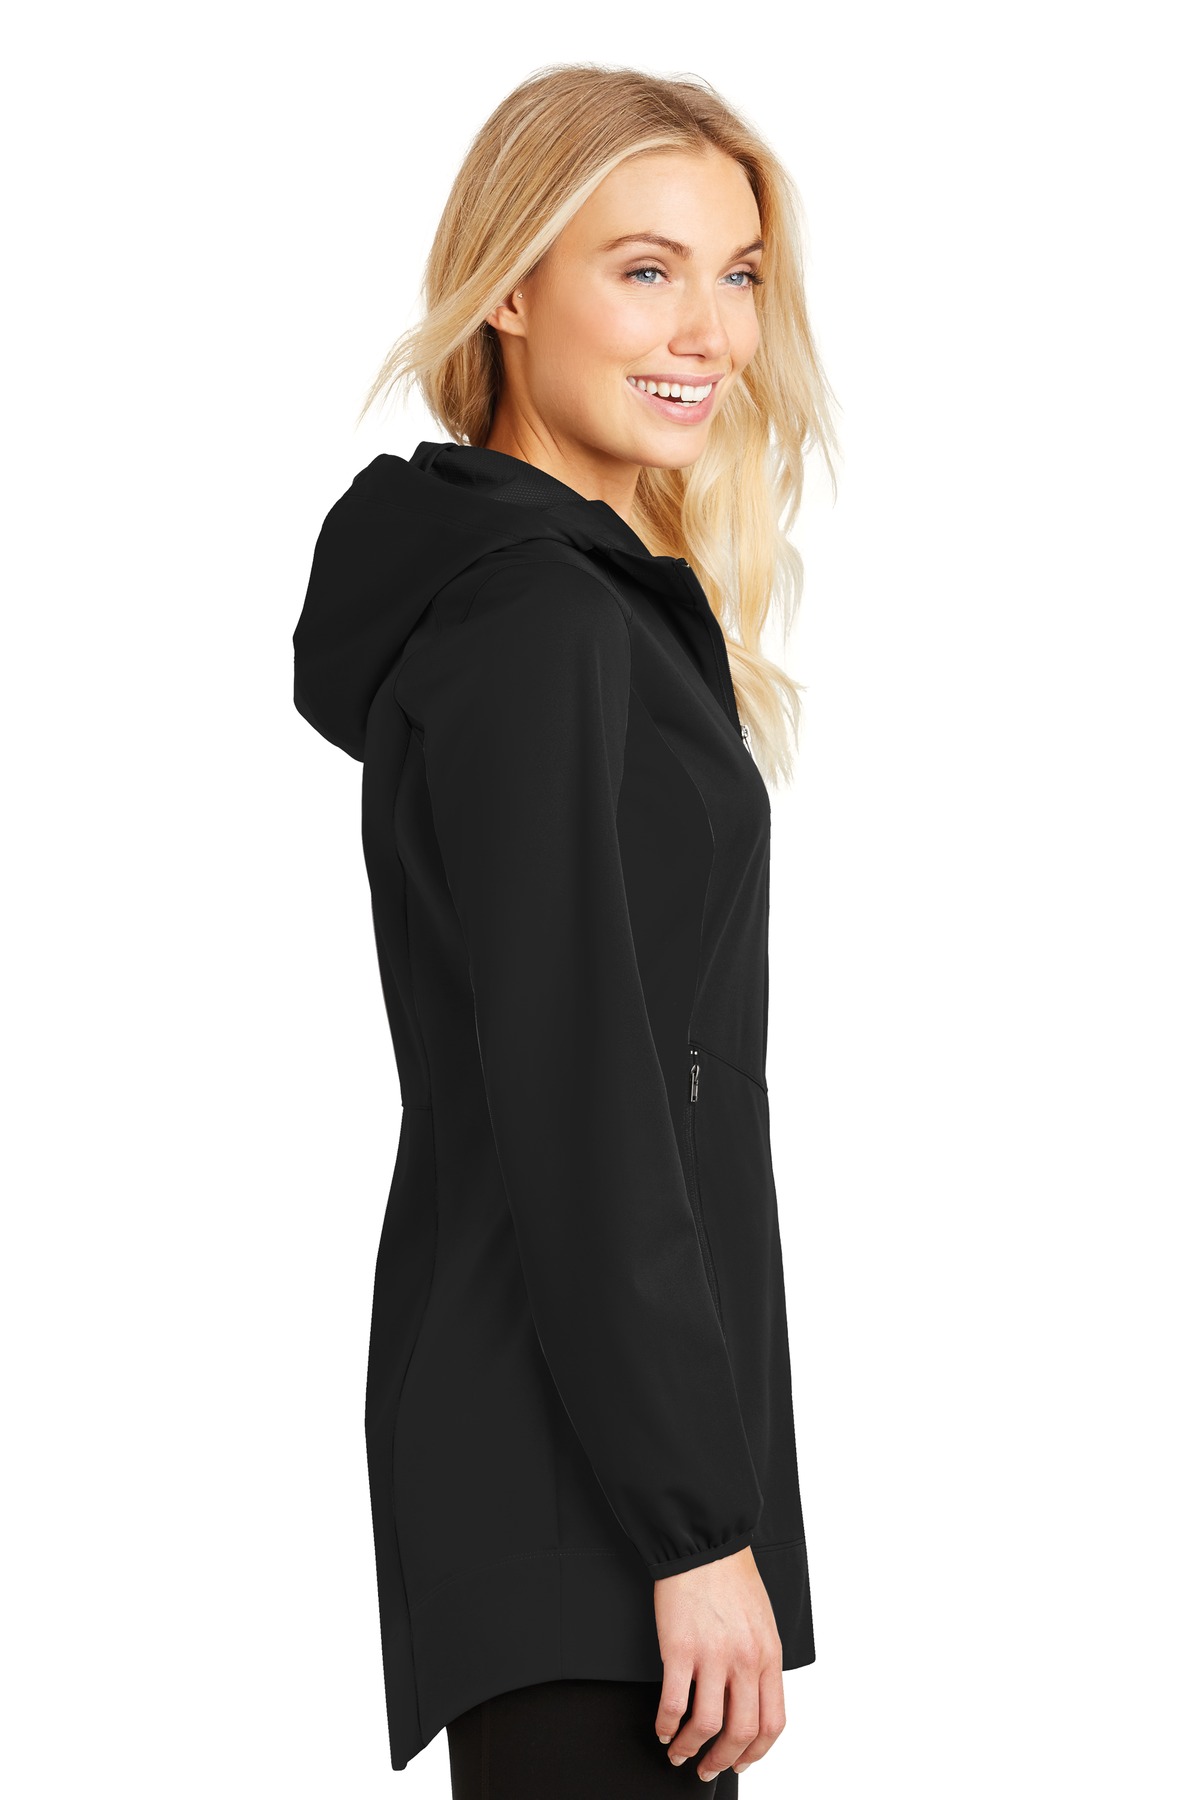 Port Authority Ladies Active Hooded Soft Shell Jacket-XS (Deep Black) - image 3 of 6